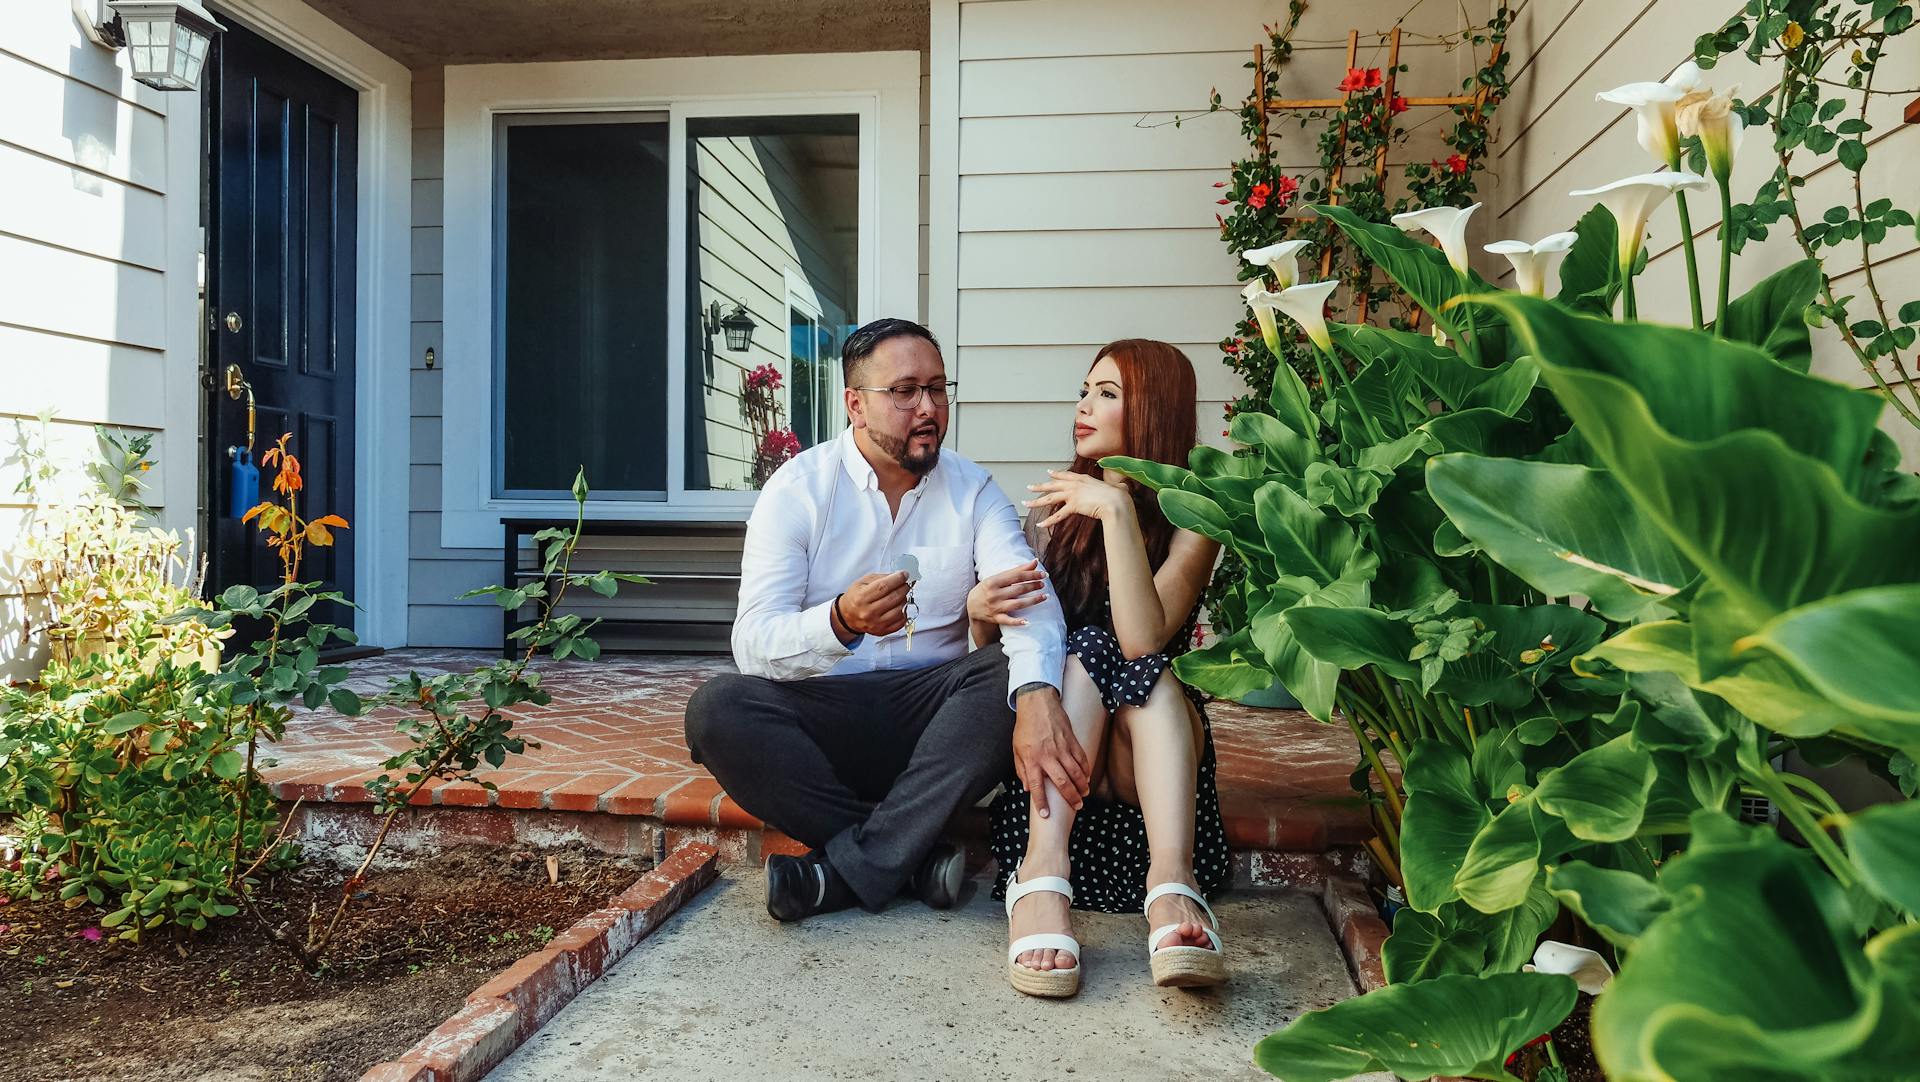 A couple sitting outside their house | Source: Pexels